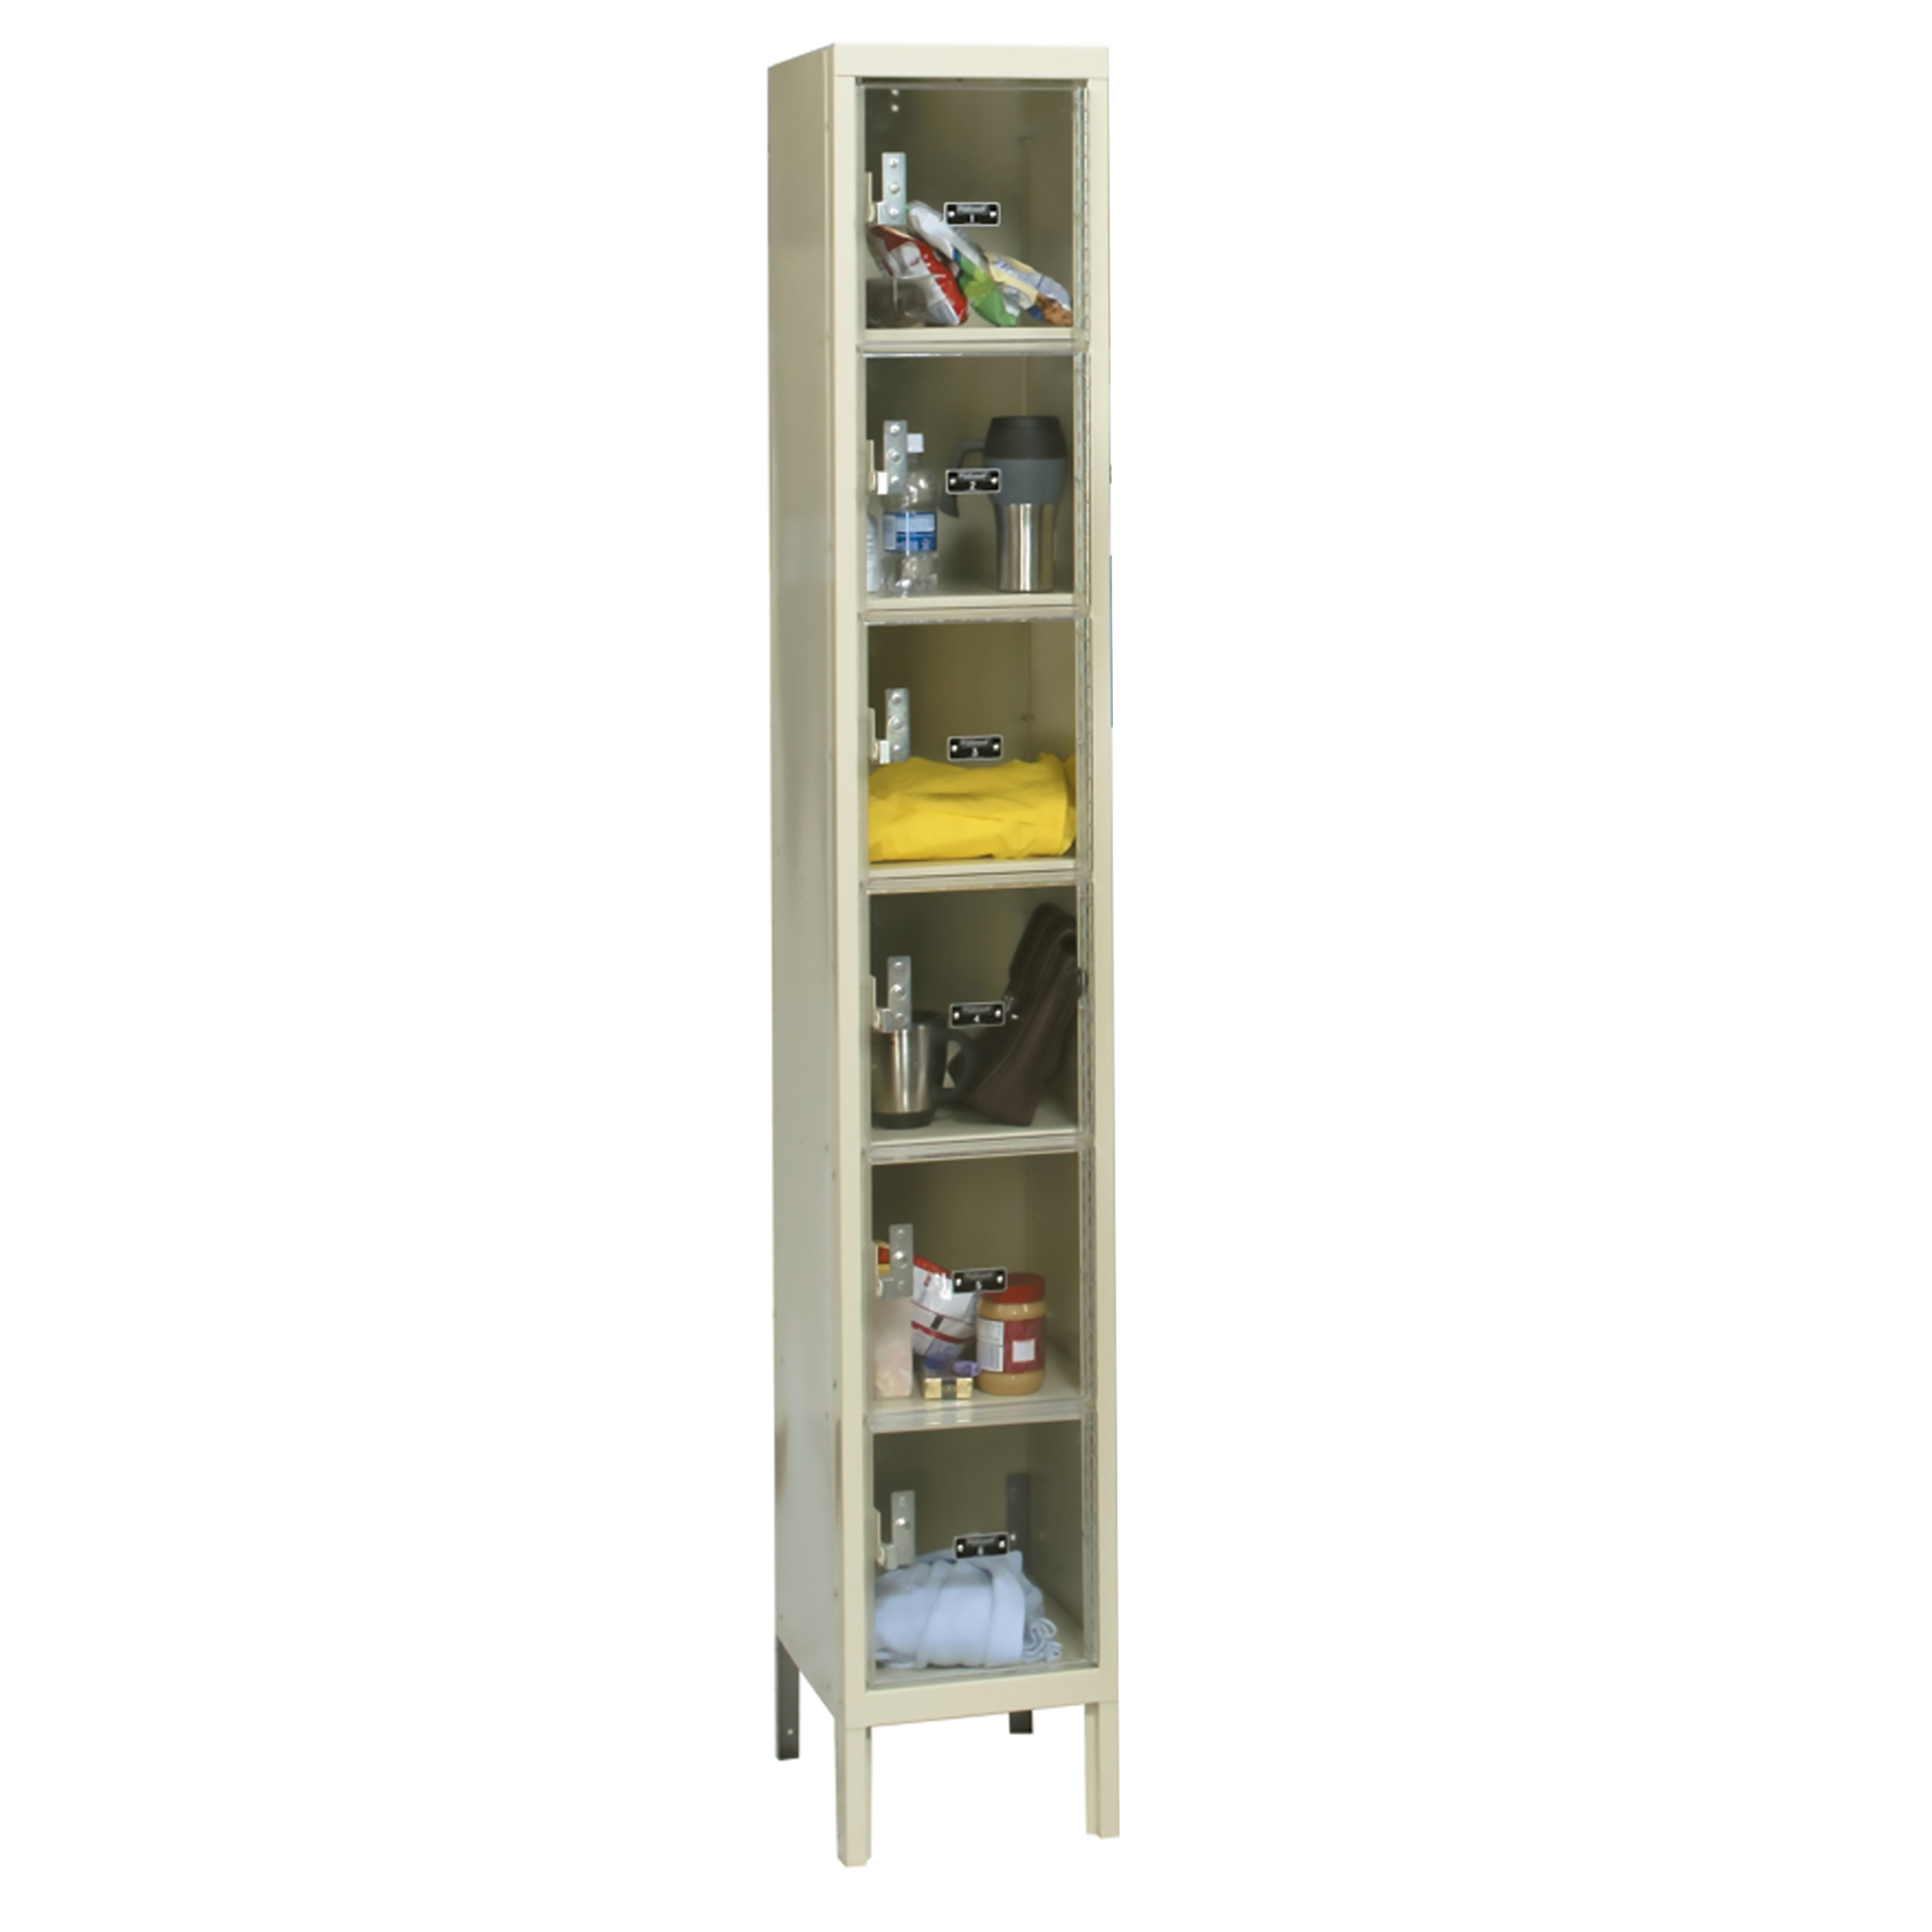 Hallowell, Six Tier Safety-View Plus Locker, Height 78 in, Width 12 in, Color Tan, Model USVP1228-6A-PT